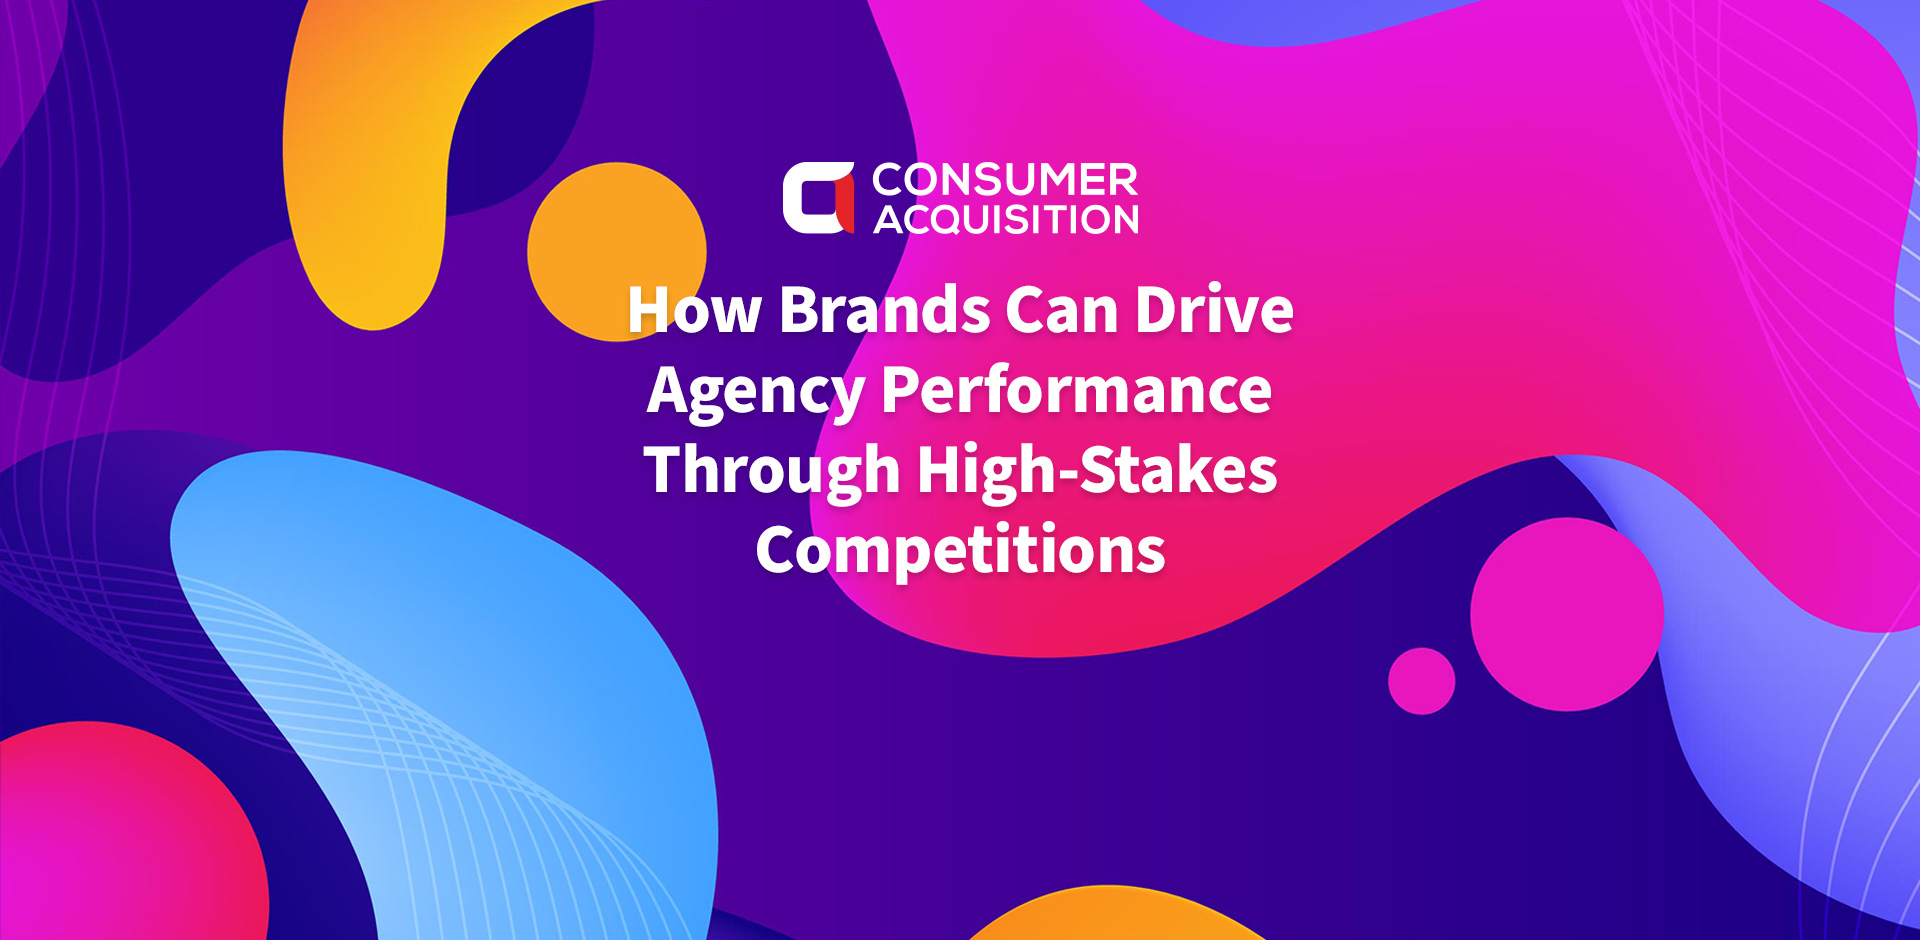 How Brands Can Drive Agency Performance Through High-Stakes Competitions